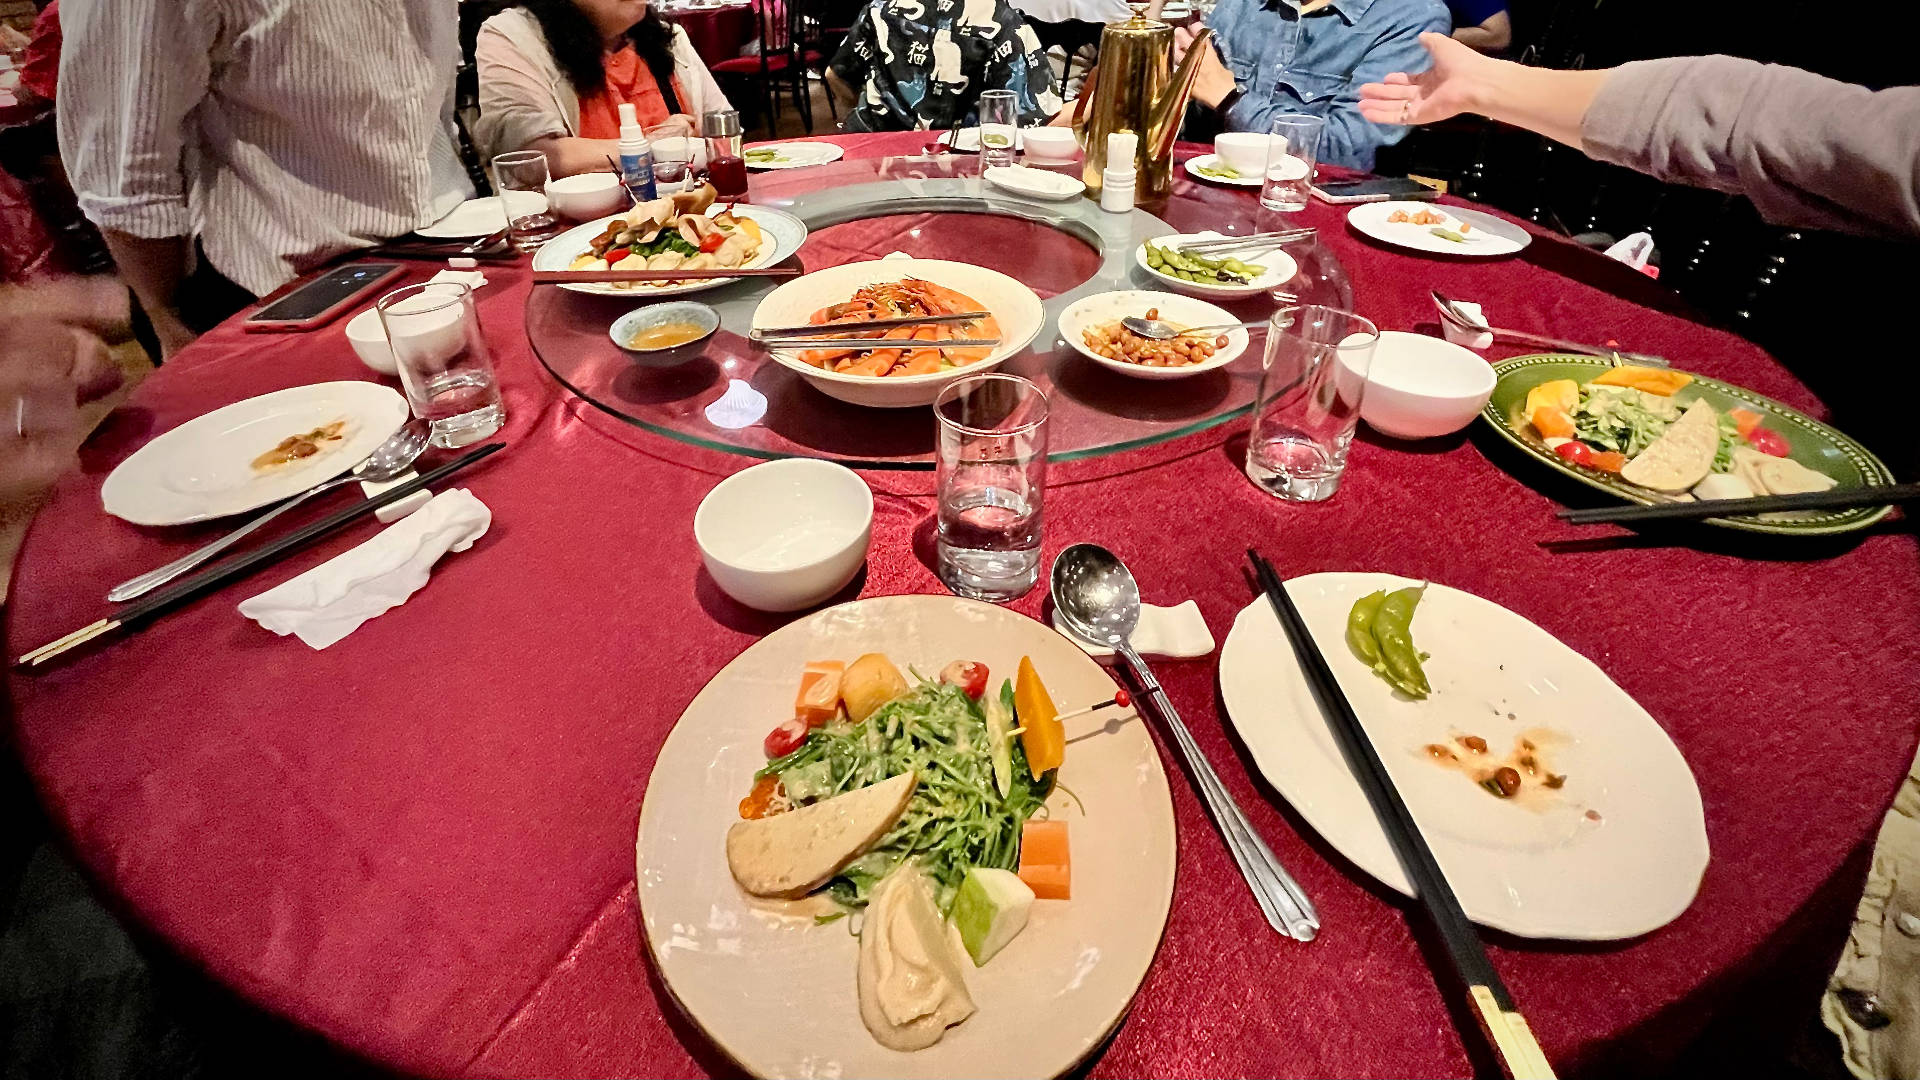 A round banquet table with multiple dishes. There are approximately 10 people seated around the table (their faces are cropped out of frame).